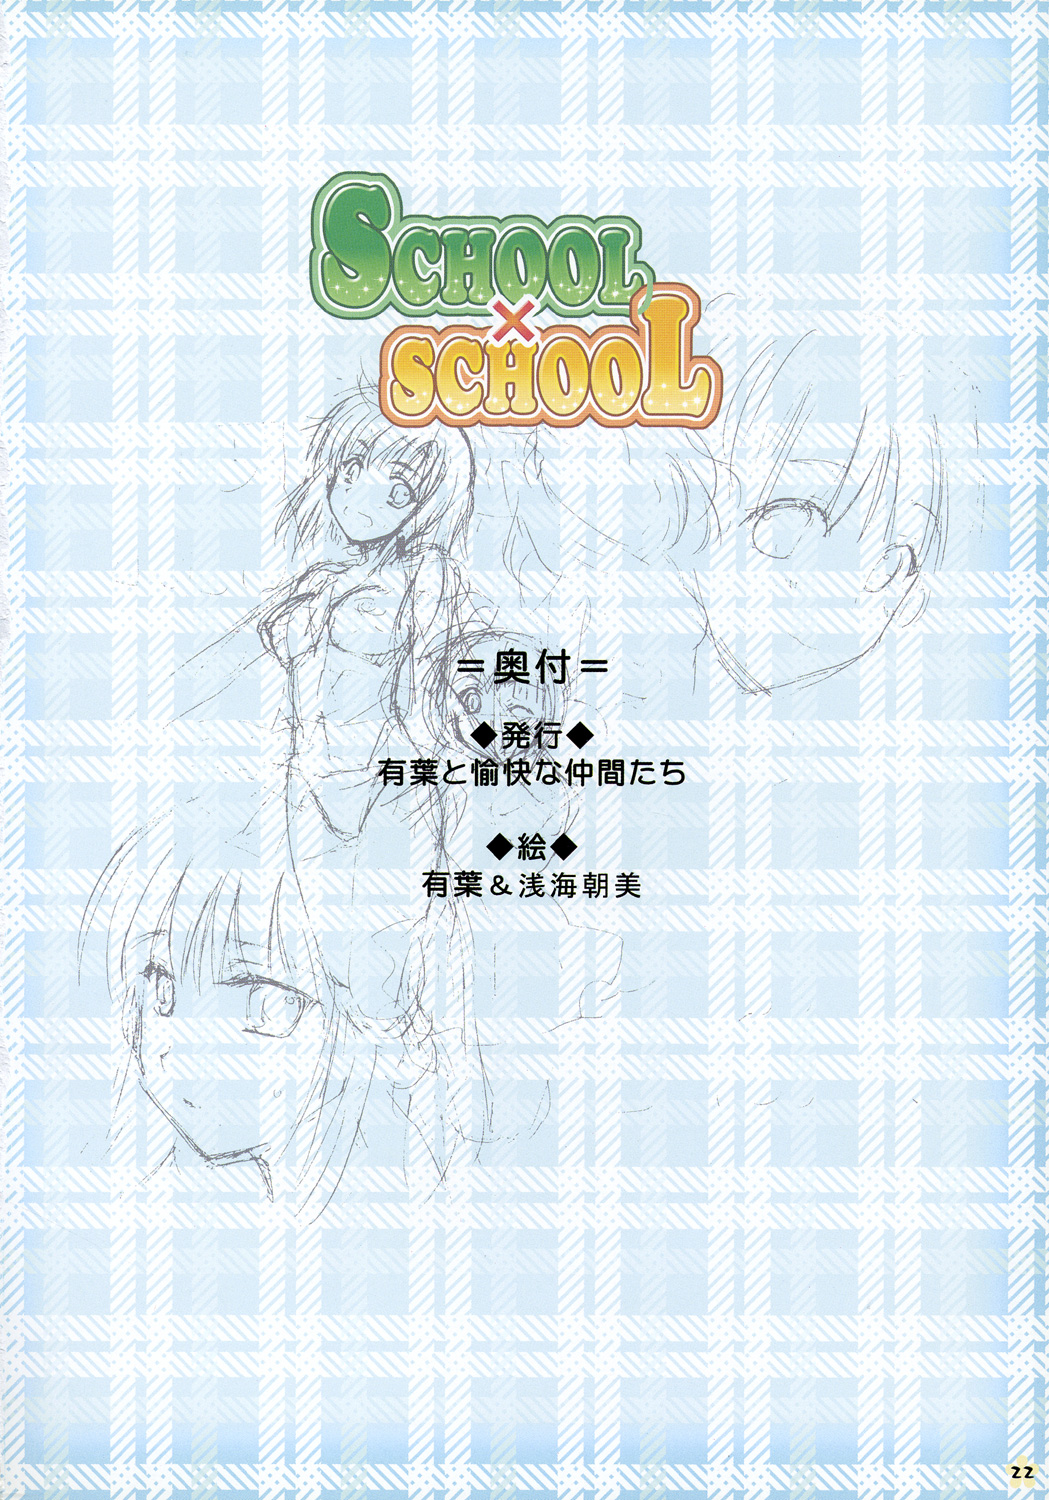 [AKABEi SOFT] SCHOOL×SCHOLL Visual Guide page 22 full